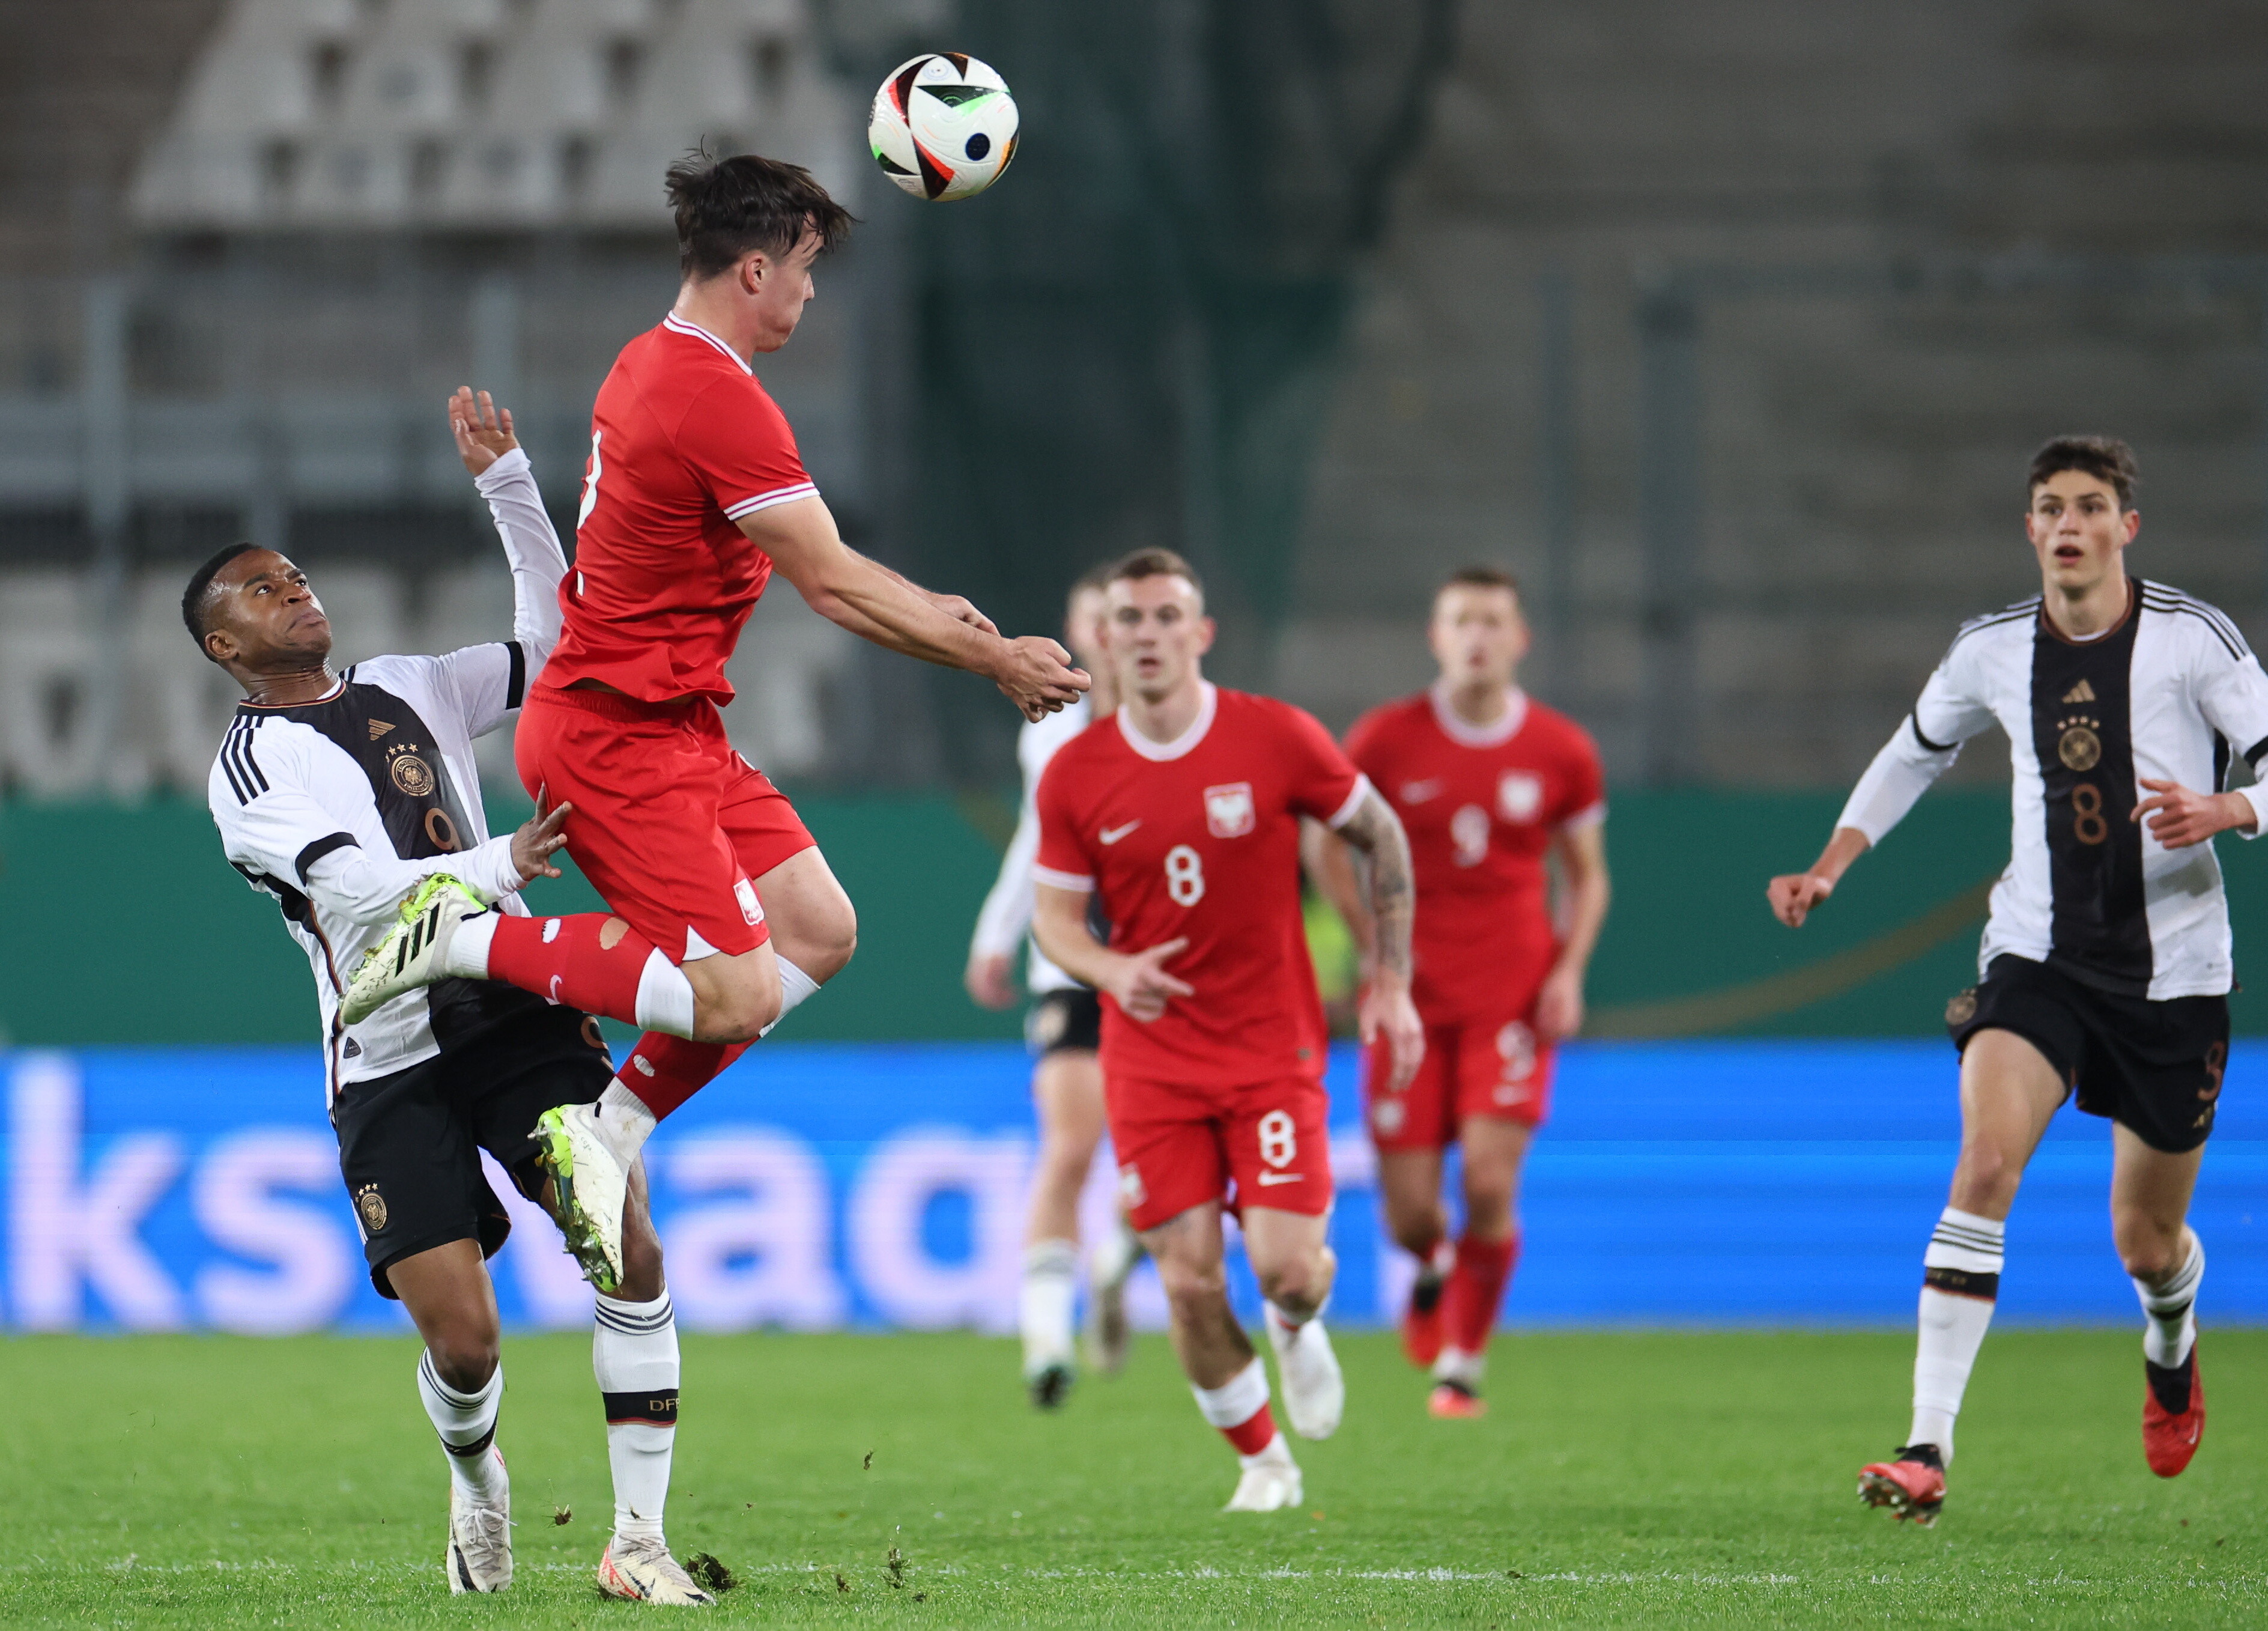 Polish youth team arrested.  Good match against Germany, but the result is not correct